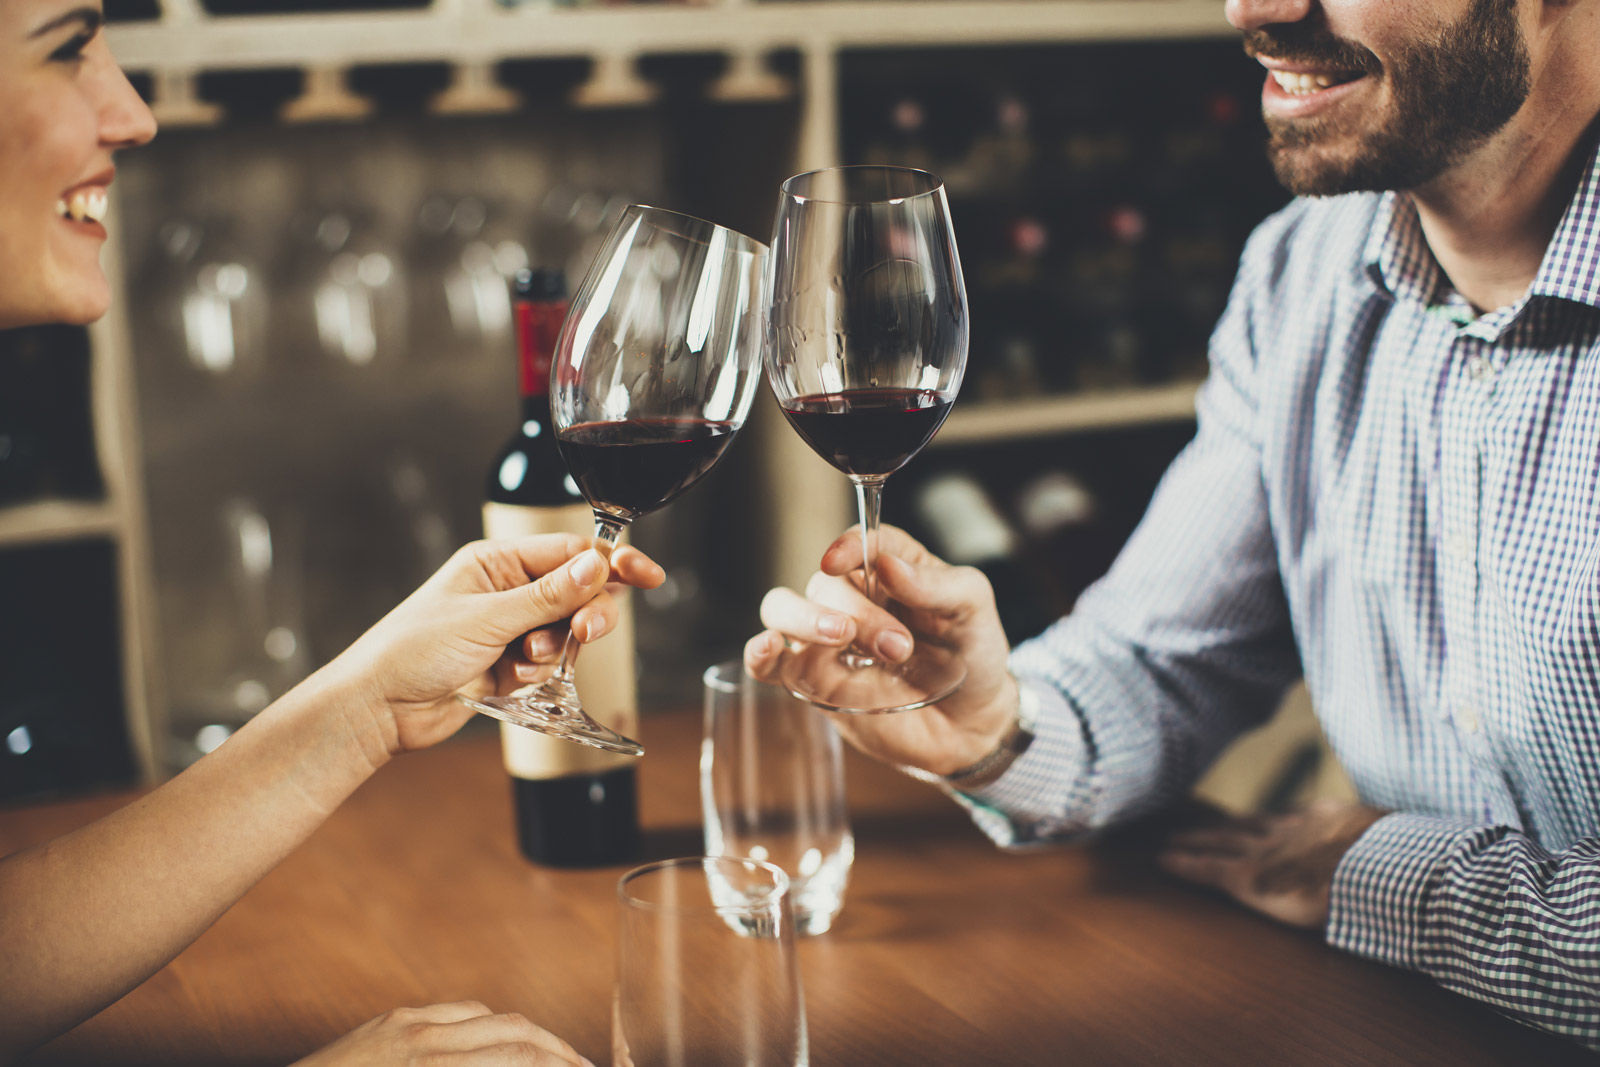 Get away for some time together with our Kelowna hotel romance or Okanagan wine tour packages.